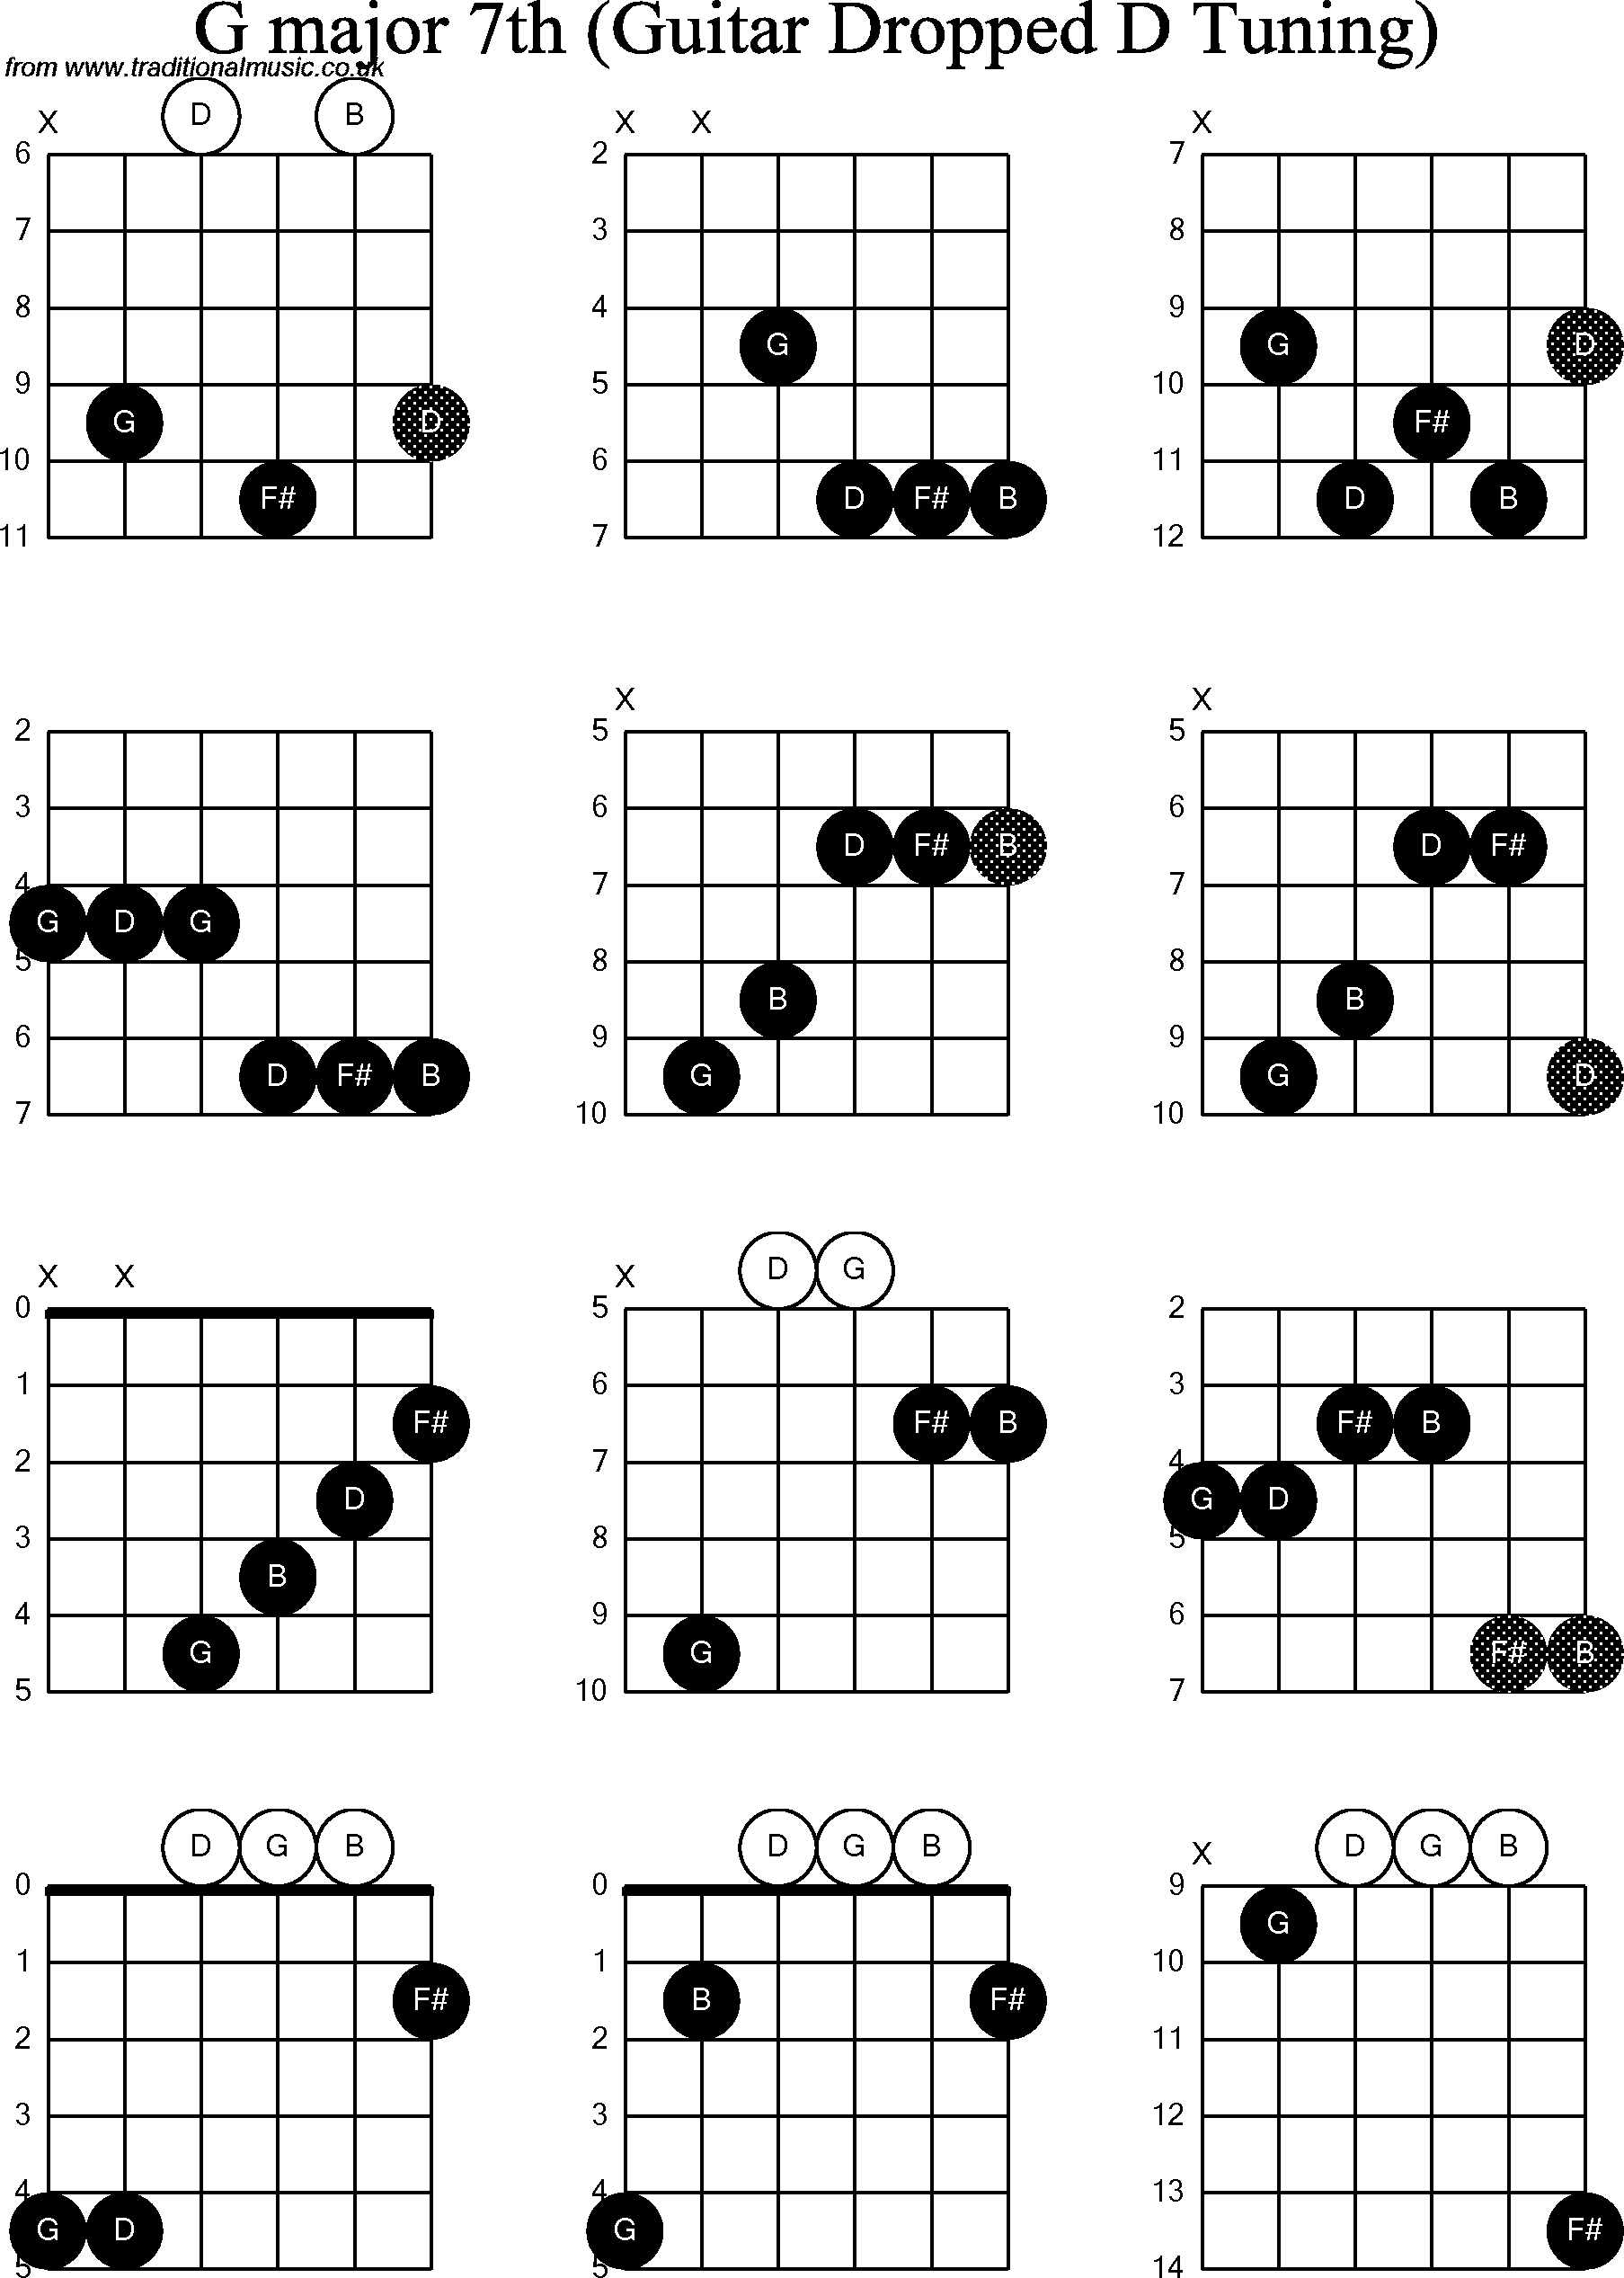 Chord diagrams for dropped D Guitar(DADGBE), G Major7th